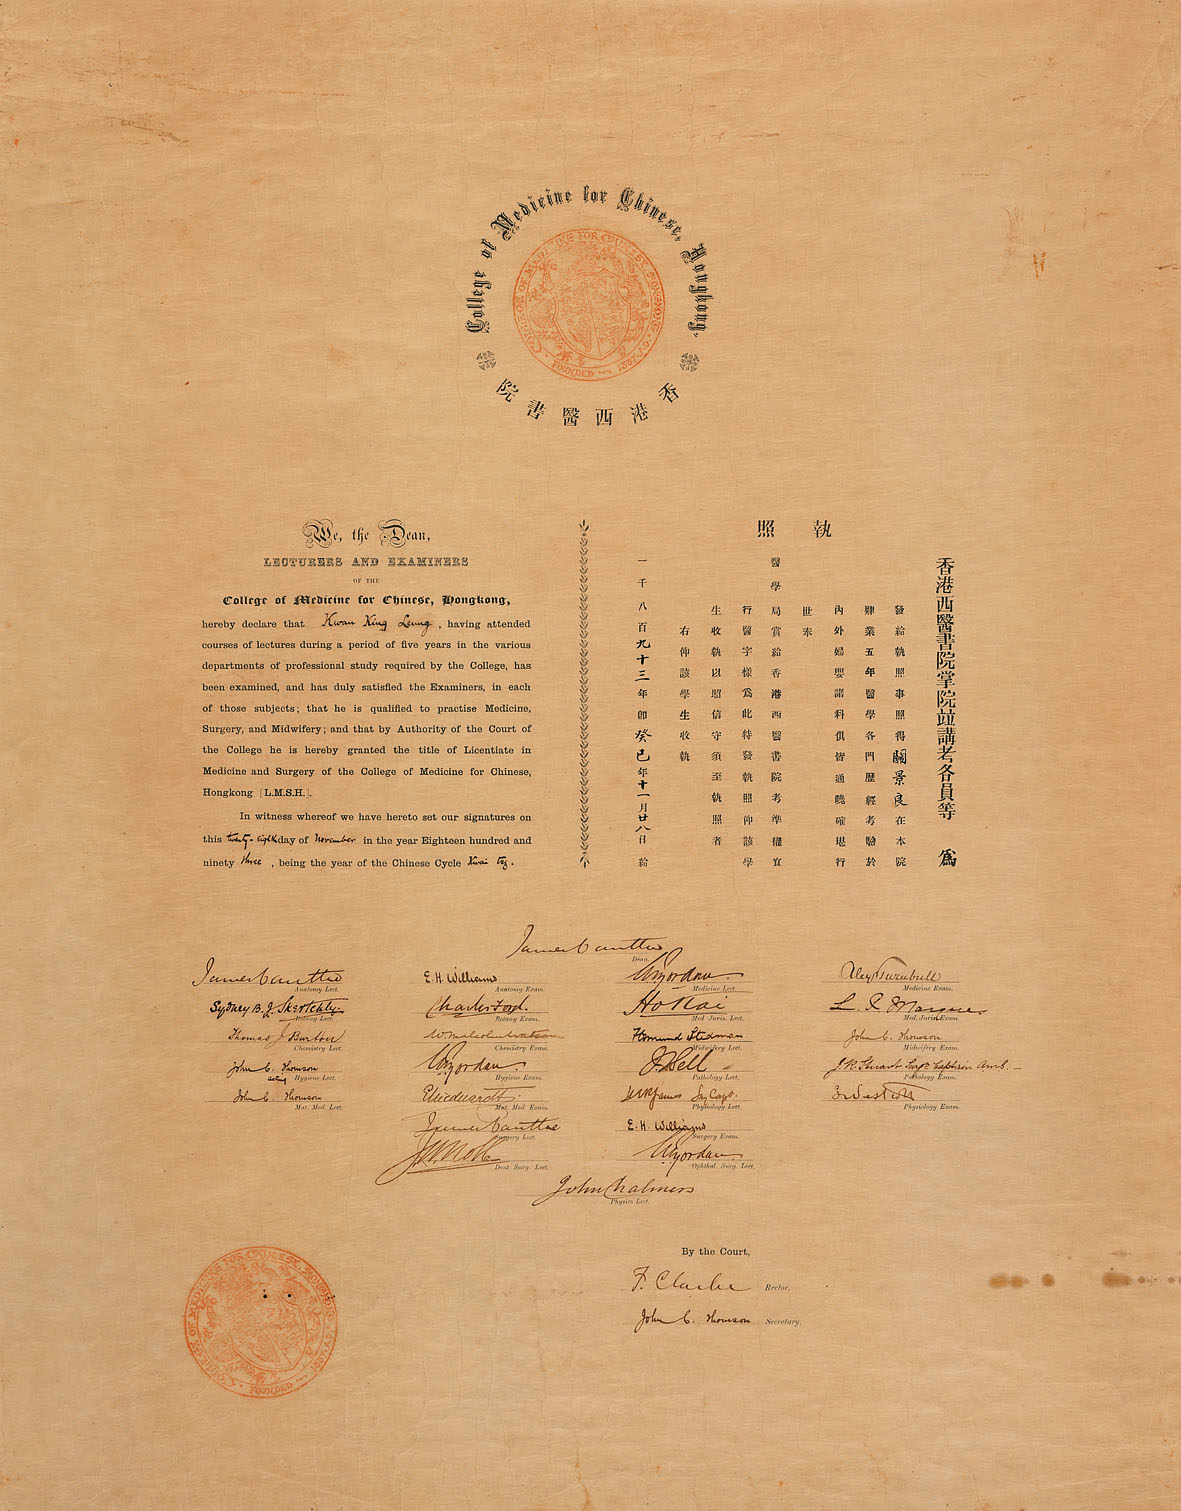 Guan Jingliang's graduation diploma from the College of Medicine for Chinese, 1893.